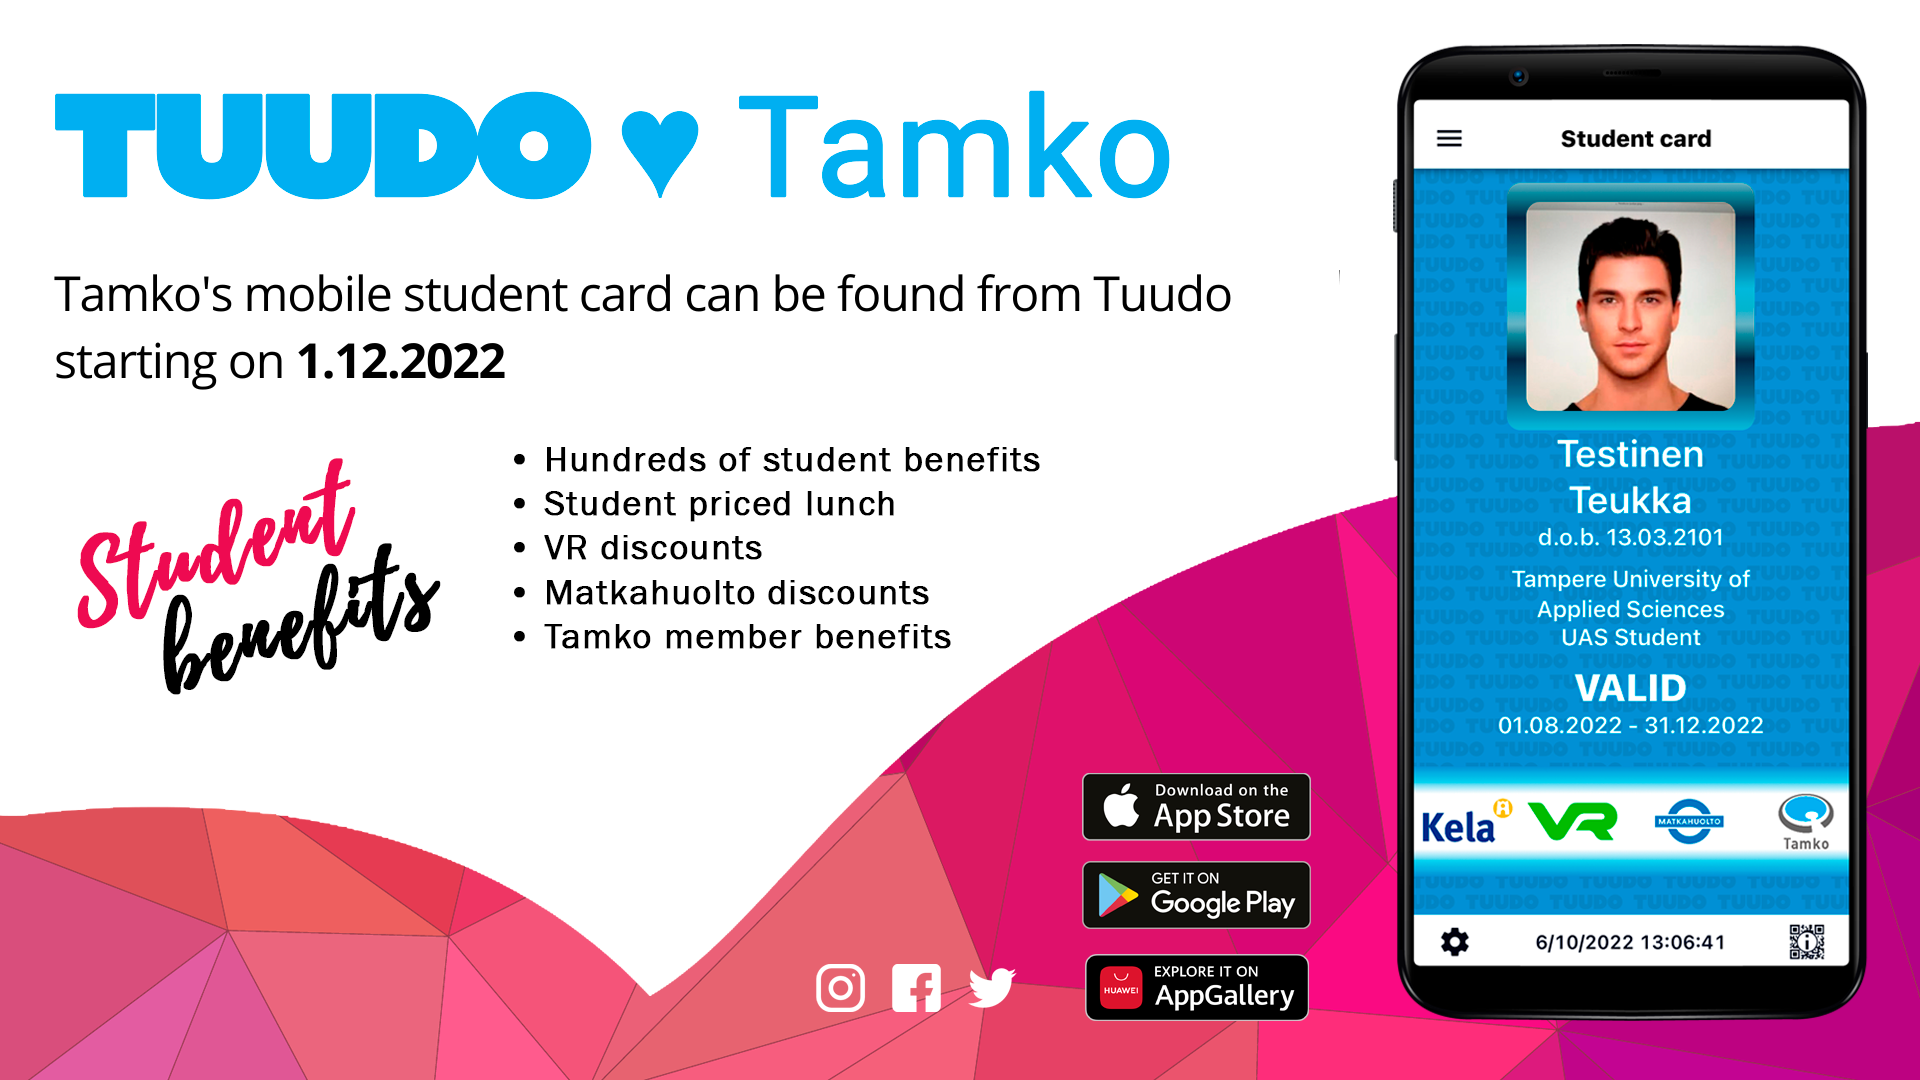 TAMKO’S MOBILE STUDENT CARD CAN BE FOUND FROM TUUDO STARTING ON 1.12.2022